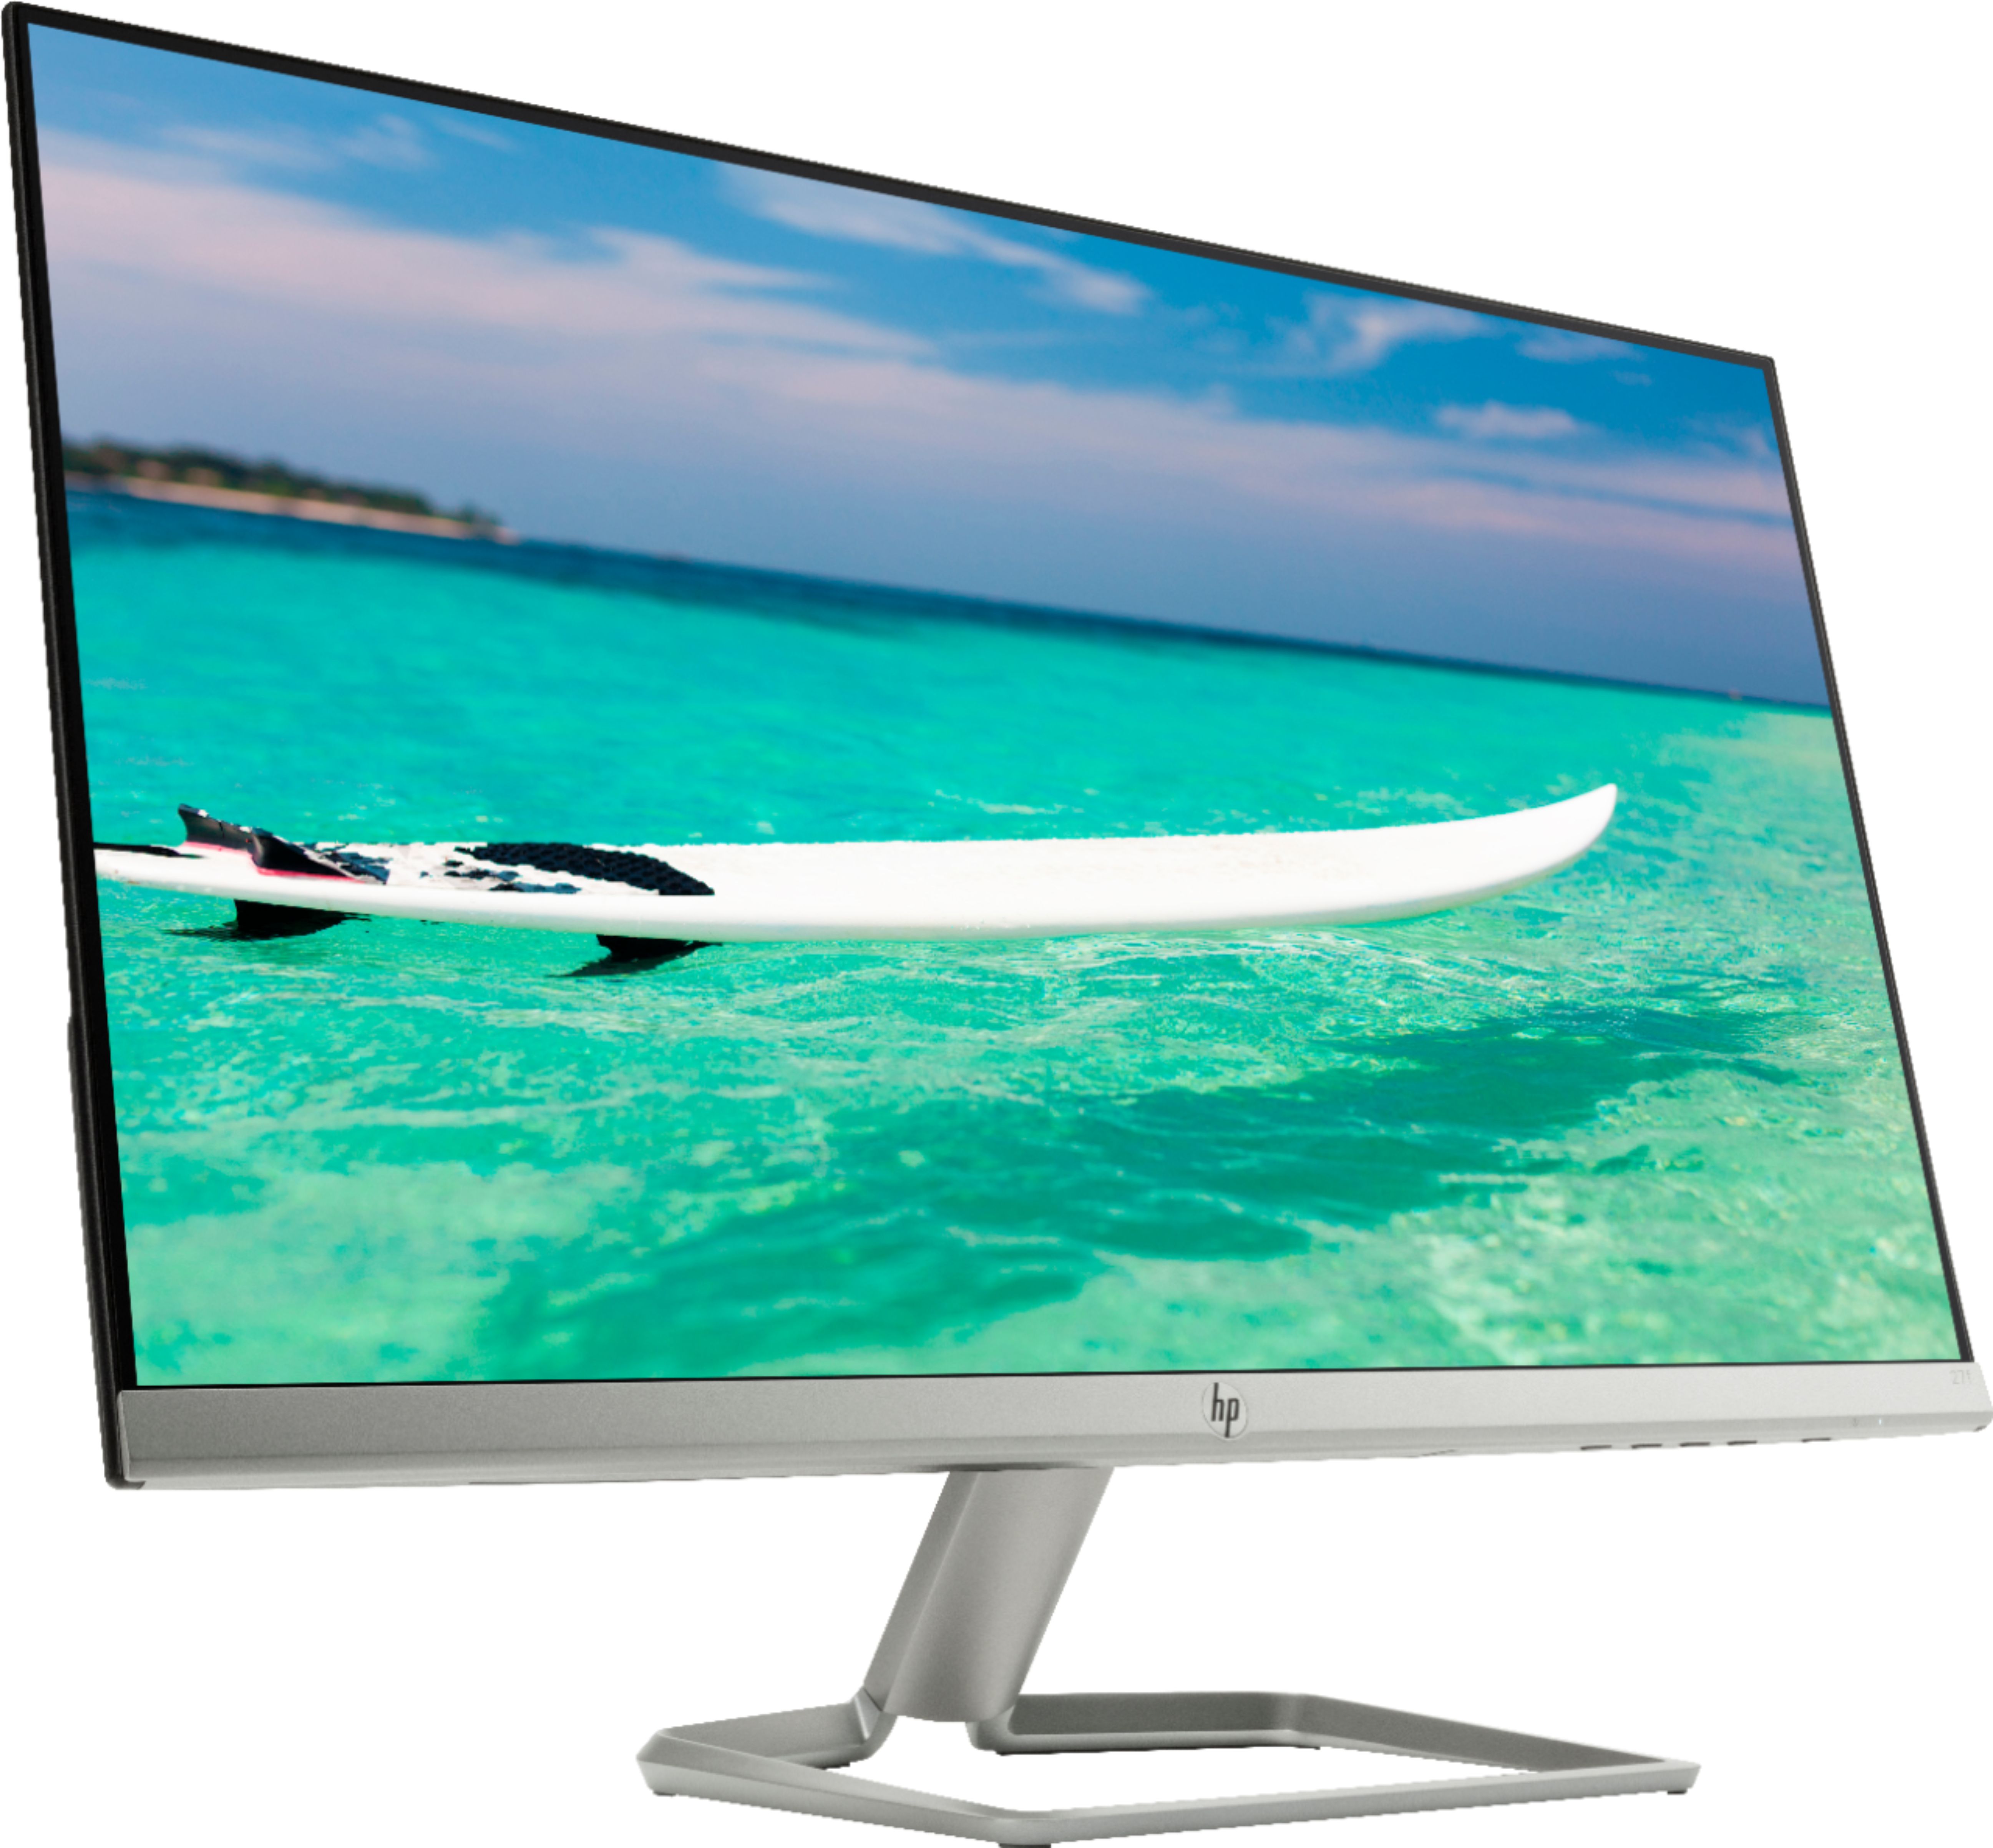 Angle View: Samsung - Geek Squad Certified Refurbished A400 Series 24" IPS LED FHD FreeSync Monitor - Black